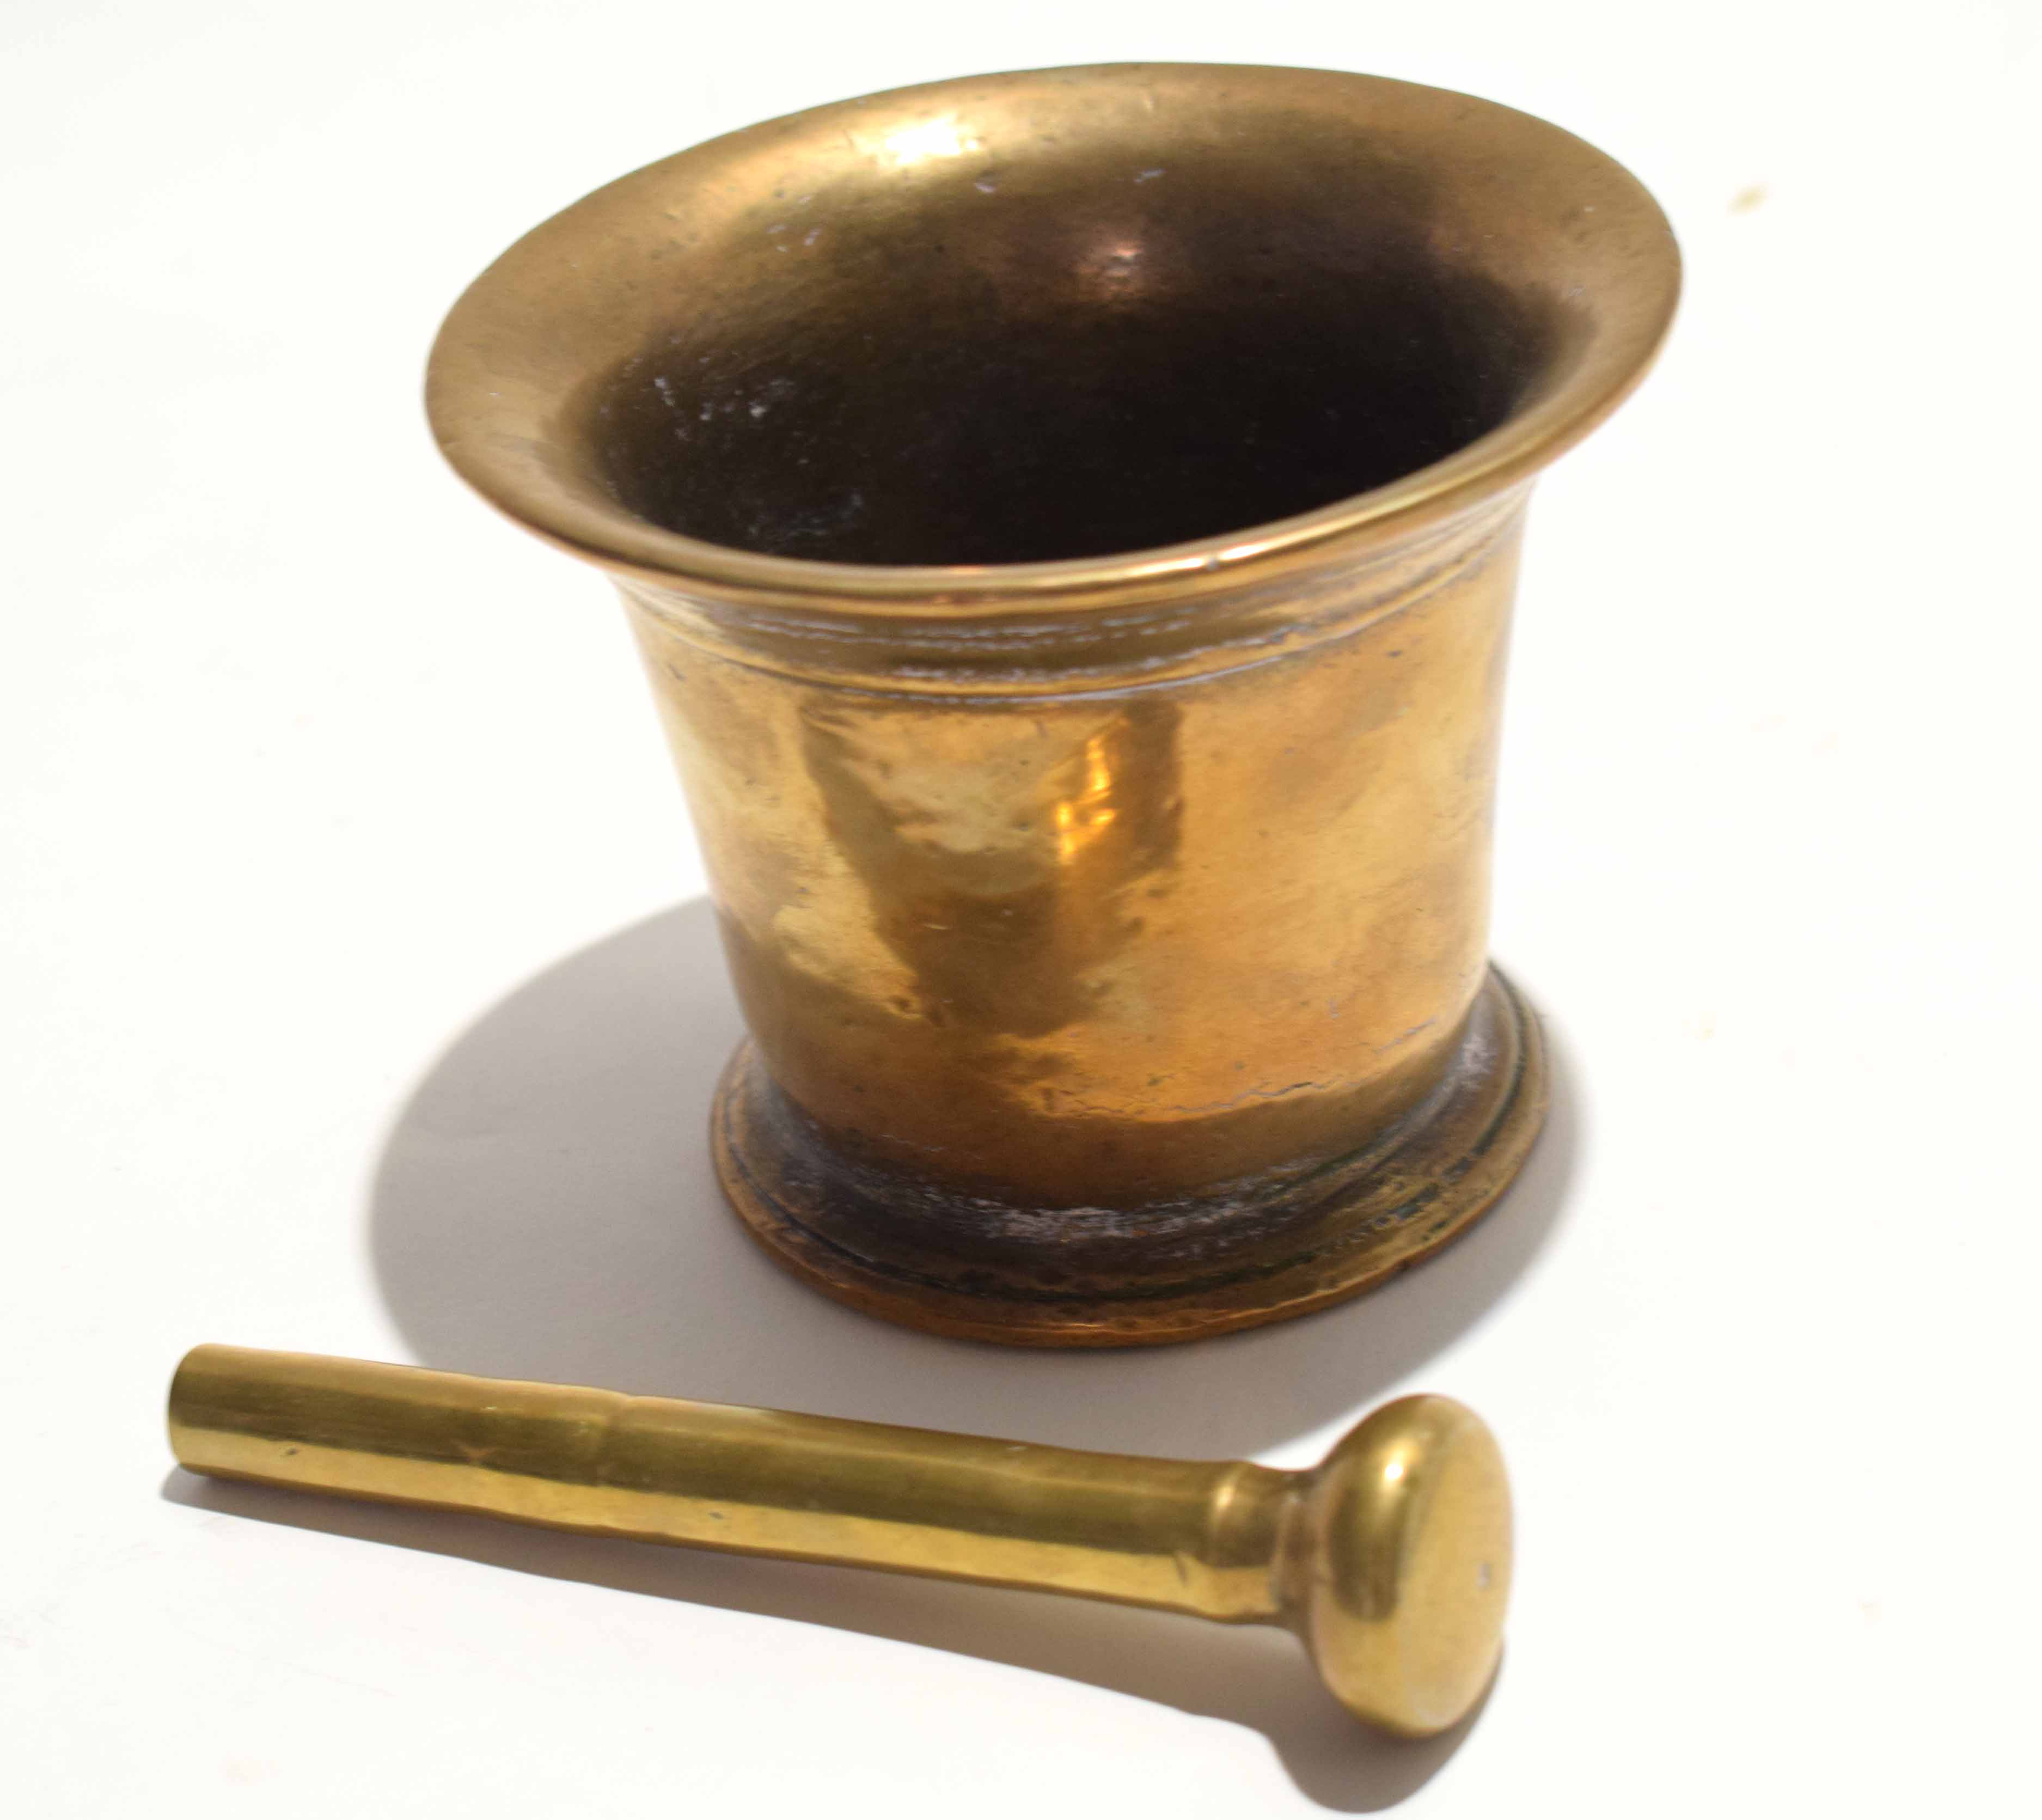 Late 17th/early 18th century bronze pestle and mortar 12cm diam x 10cm high